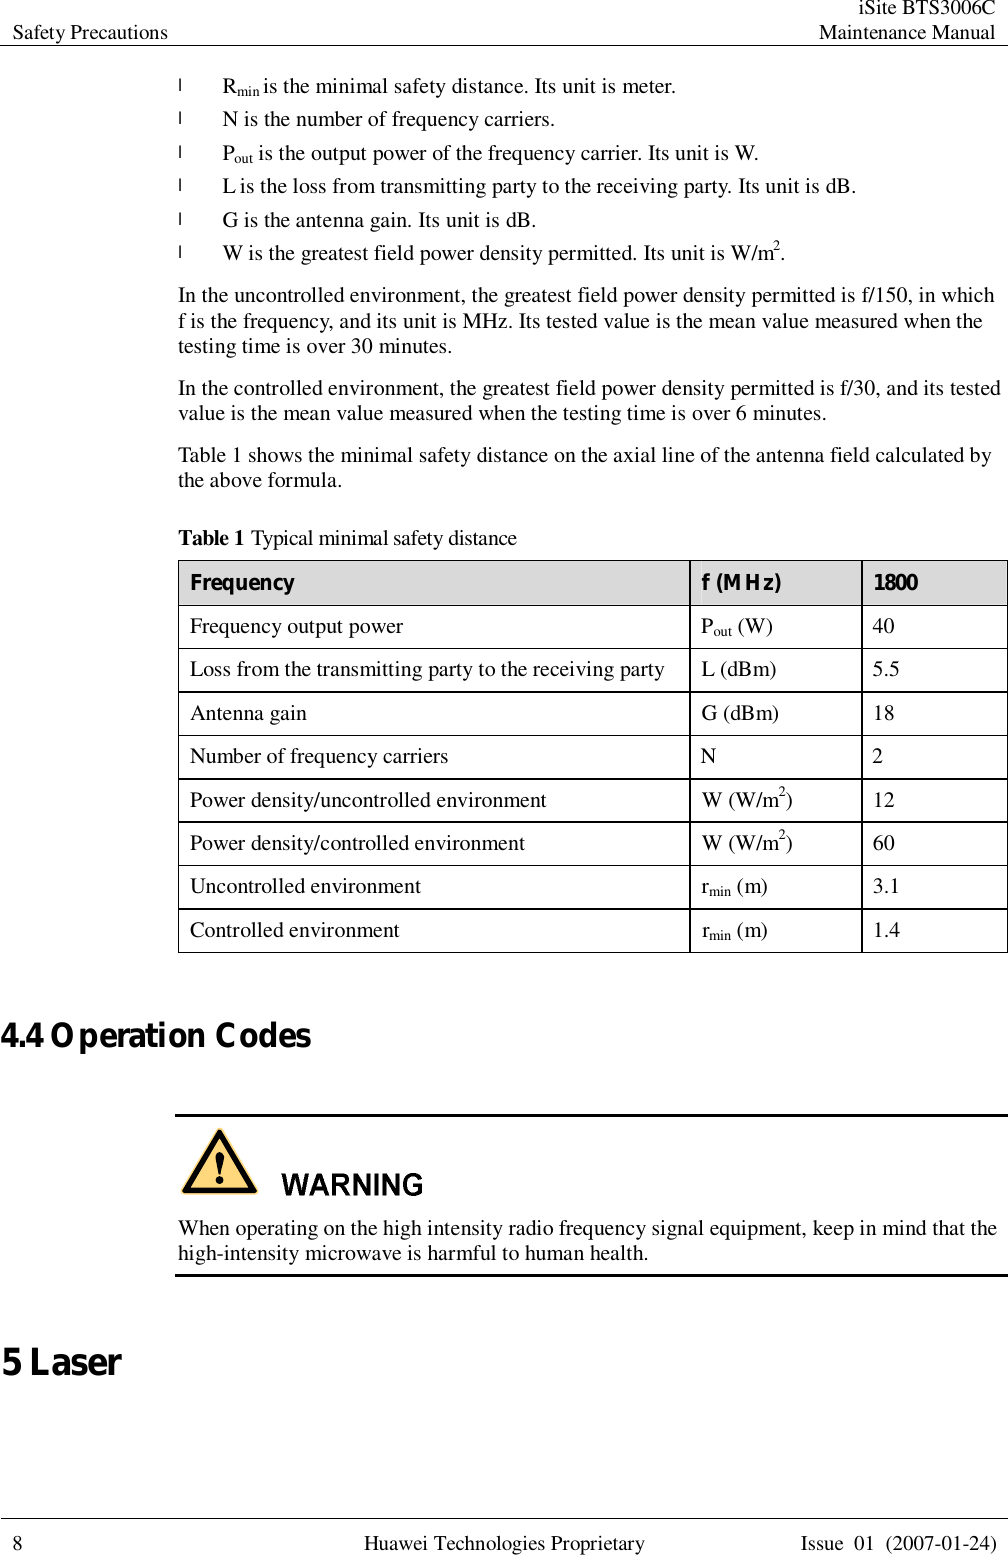 Safety Precautions  iSite BTS3006C Maintenance Manual  8 Huawei Technologies Proprietary Issue 01 (2007-01-24)  l Rmin is the minimal safety distance. Its unit is meter.  l N is the number of frequency carriers. l Pout is the output power of the frequency carrier. Its unit is W.  l L is the loss from transmitting party to the receiving party. Its unit is dB. l G is the antenna gain. Its unit is dB. l W is the greatest field power density permitted. Its unit is W/m2. In the uncontrolled environment, the greatest field power density permitted is f/150, in which f is the frequency, and its unit is MHz. Its tested value is the mean value measured when the testing time is over 30 minutes. In the controlled environment, the greatest field power density permitted is f/30, and its tested value is the mean value measured when the testing time is over 6 minutes. Table 1 shows the minimal safety distance on the axial line of the antenna field calculated by the above formula. Table 1 Typical minimal safety distance Frequency  f (MHz)  1800 Frequency output power  Pout (W) 40 Loss from the transmitting party to the receiving party L (dBm) 5.5 Antenna gain G (dBm) 18 Number of frequency carriers N 2 Power density/uncontrolled environment  W (W/m2) 12 Power density/controlled environment W (W/m2) 60 Uncontrolled environment rmin (m) 3.1 Controlled environment rmin (m) 1.4  4.4 Operation Codes   When operating on the high intensity radio frequency signal equipment, keep in mind that the high-intensity microwave is harmful to human health. 5 Laser  